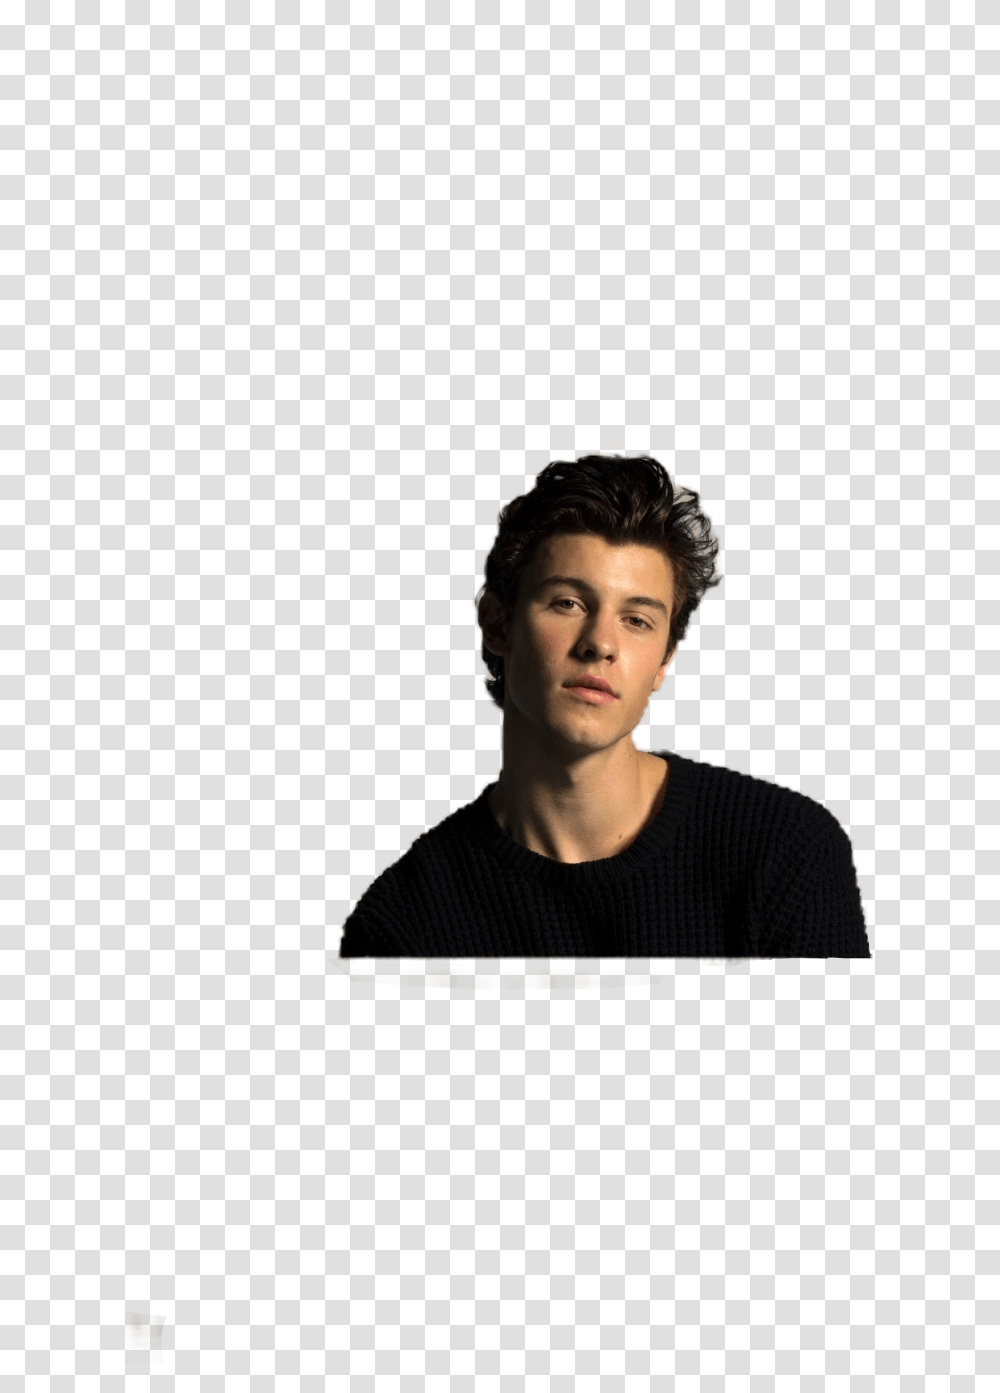 Shawnmendes Mendesarmy Shawn Mendes Inmyblood Shawn Mendes, Person, Face, Sleeve Transparent Png